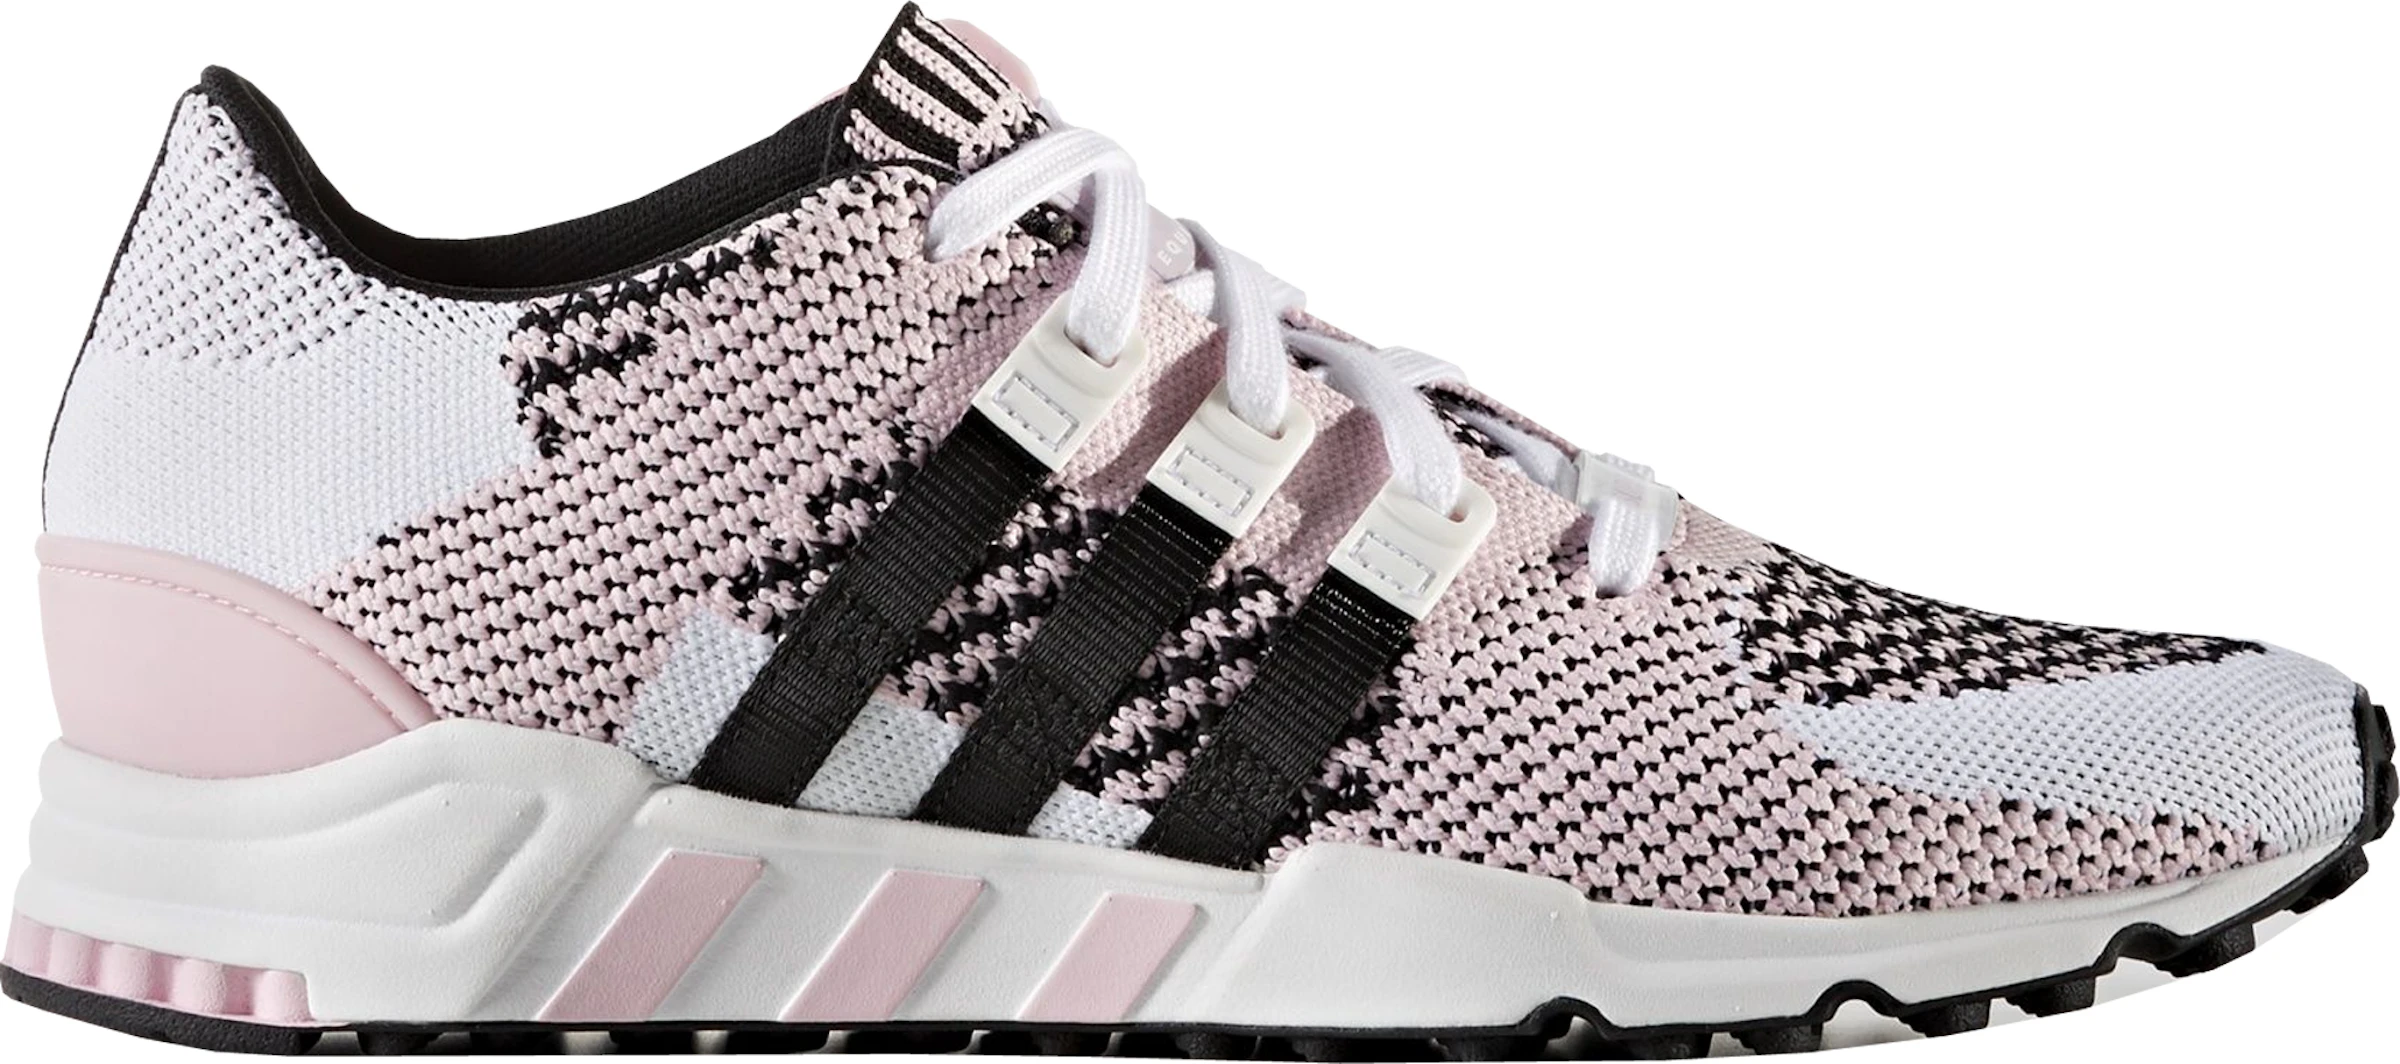 adidas Support Primeknit Pink Black (W) - BY9601 -